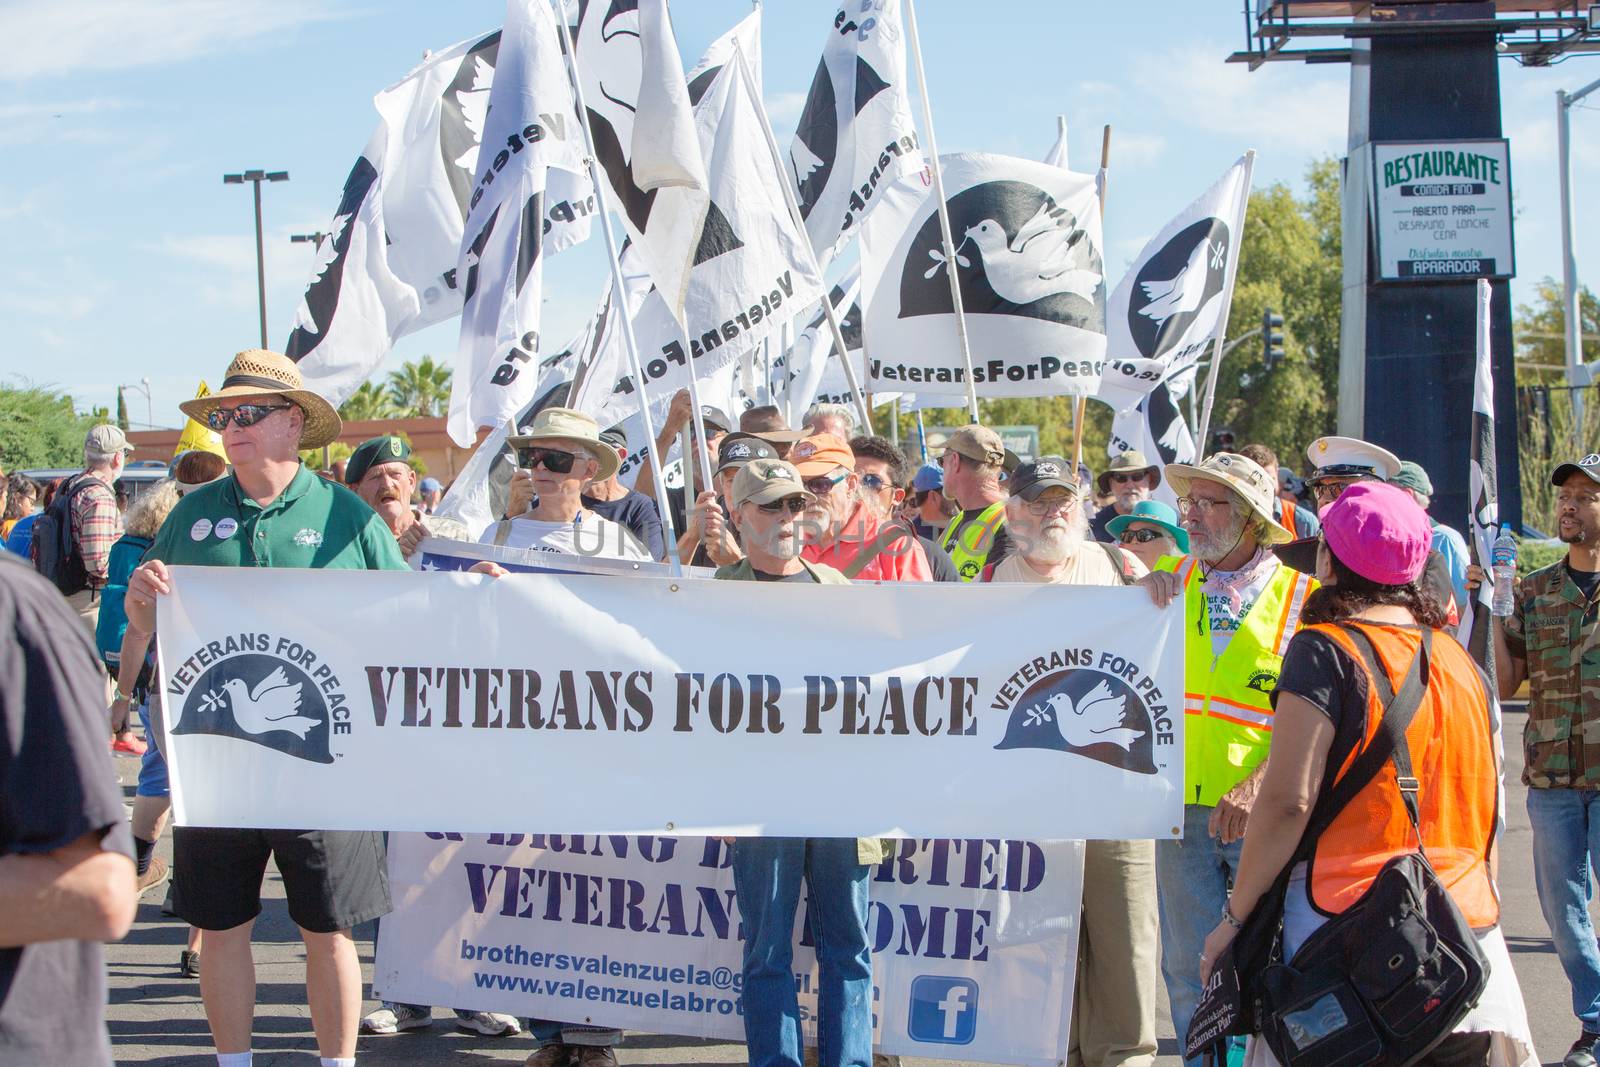 NOGALES, AZ - OCTOBER 08: Large group of men and women from Veterans For Peace holding banners and flags during border policy protest march on October 08, 2016 in Nogales, AZ, USA.